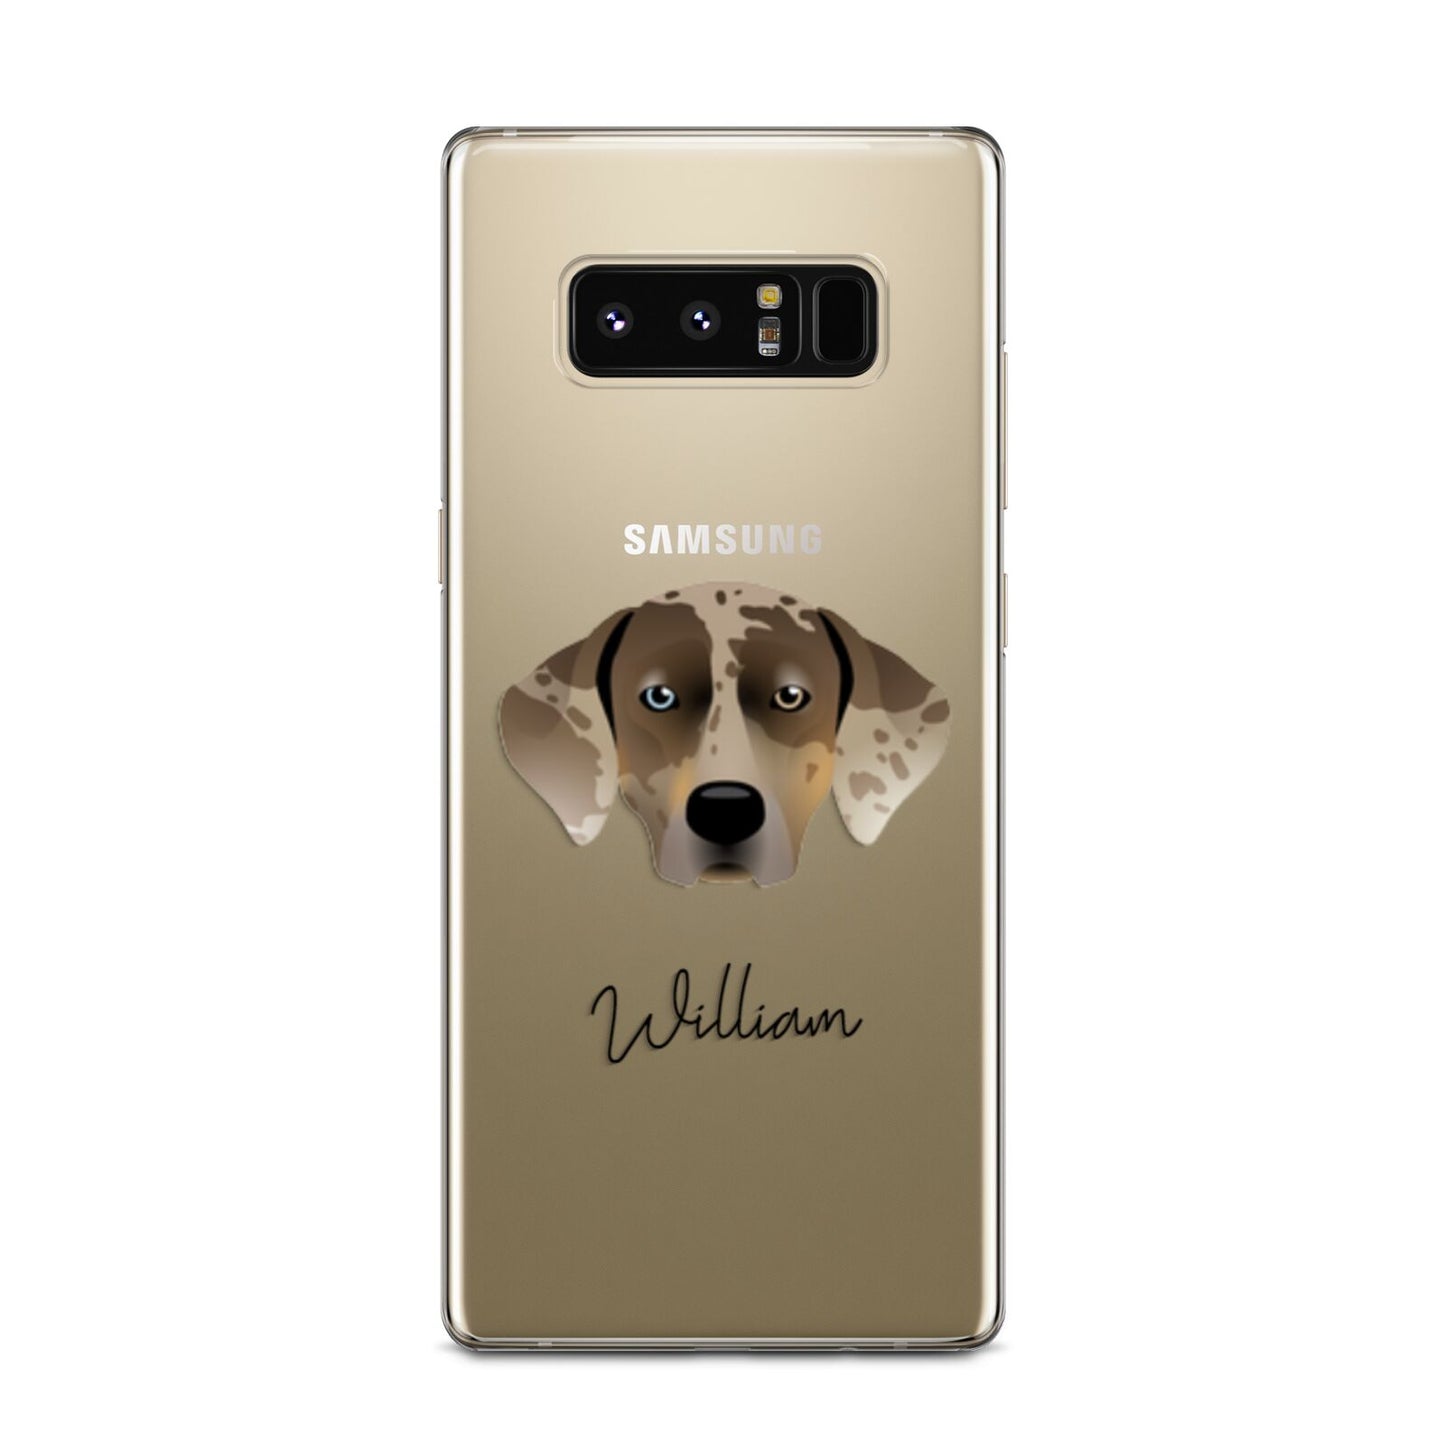 Catahoula Leopard Dog Personalised Samsung Galaxy Note 8 Case